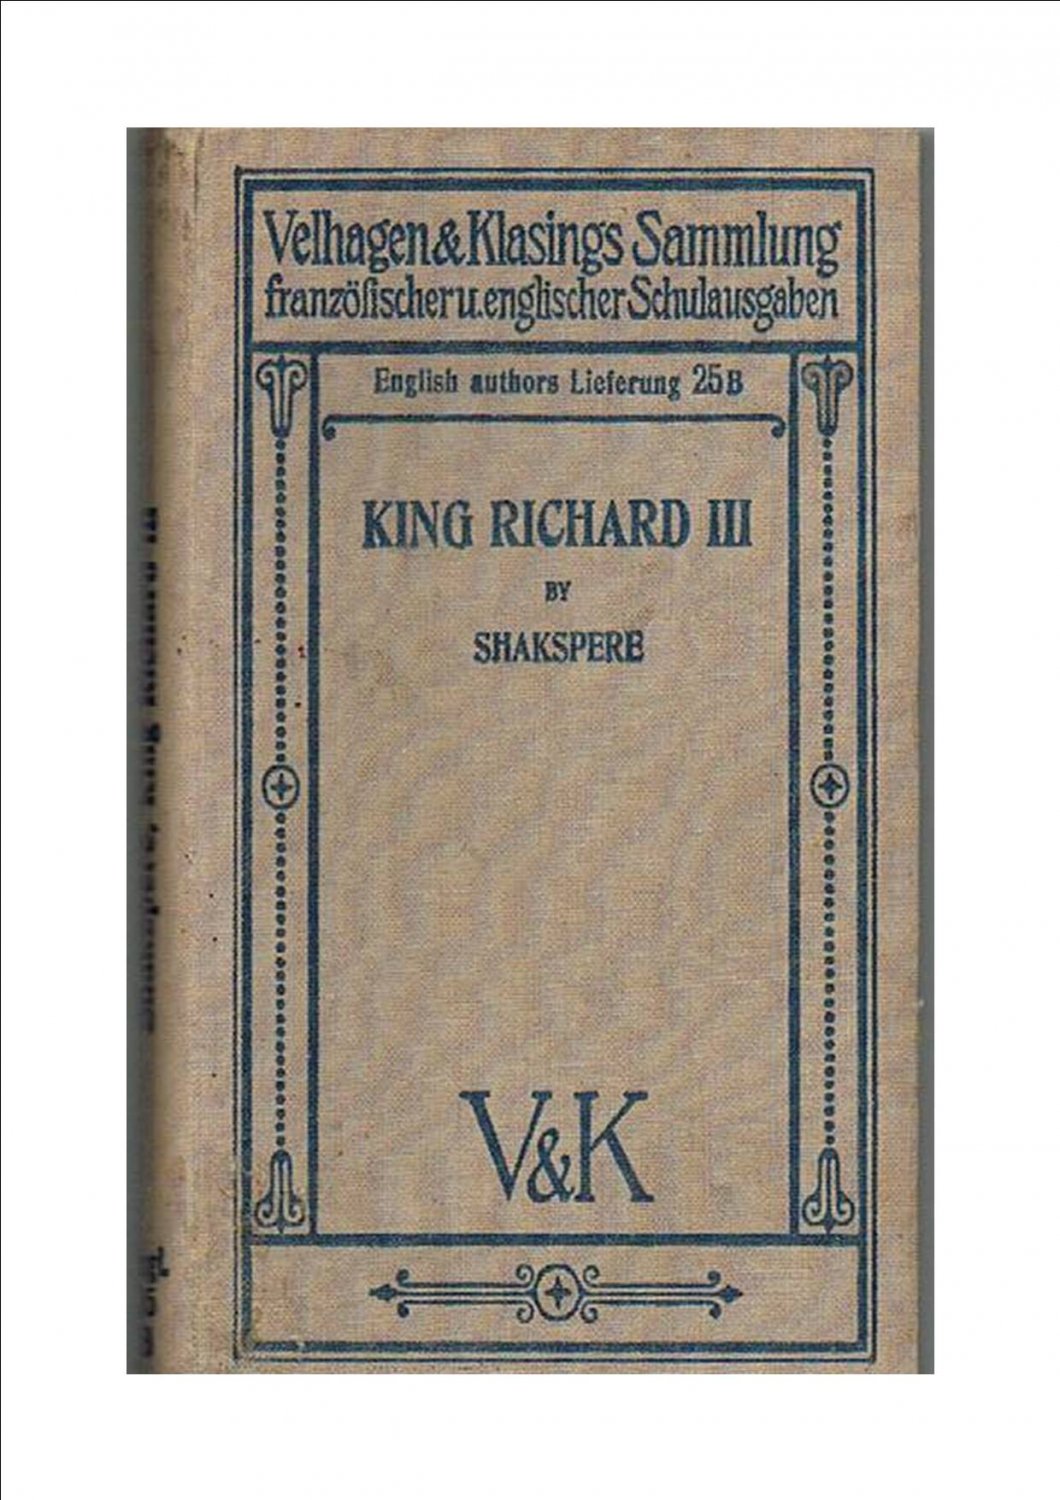 Shakespeare William The Tragedy Of King Richard Iii Paul Poppe Buch Antiquarisch Kaufen A02pfe0s01zzl